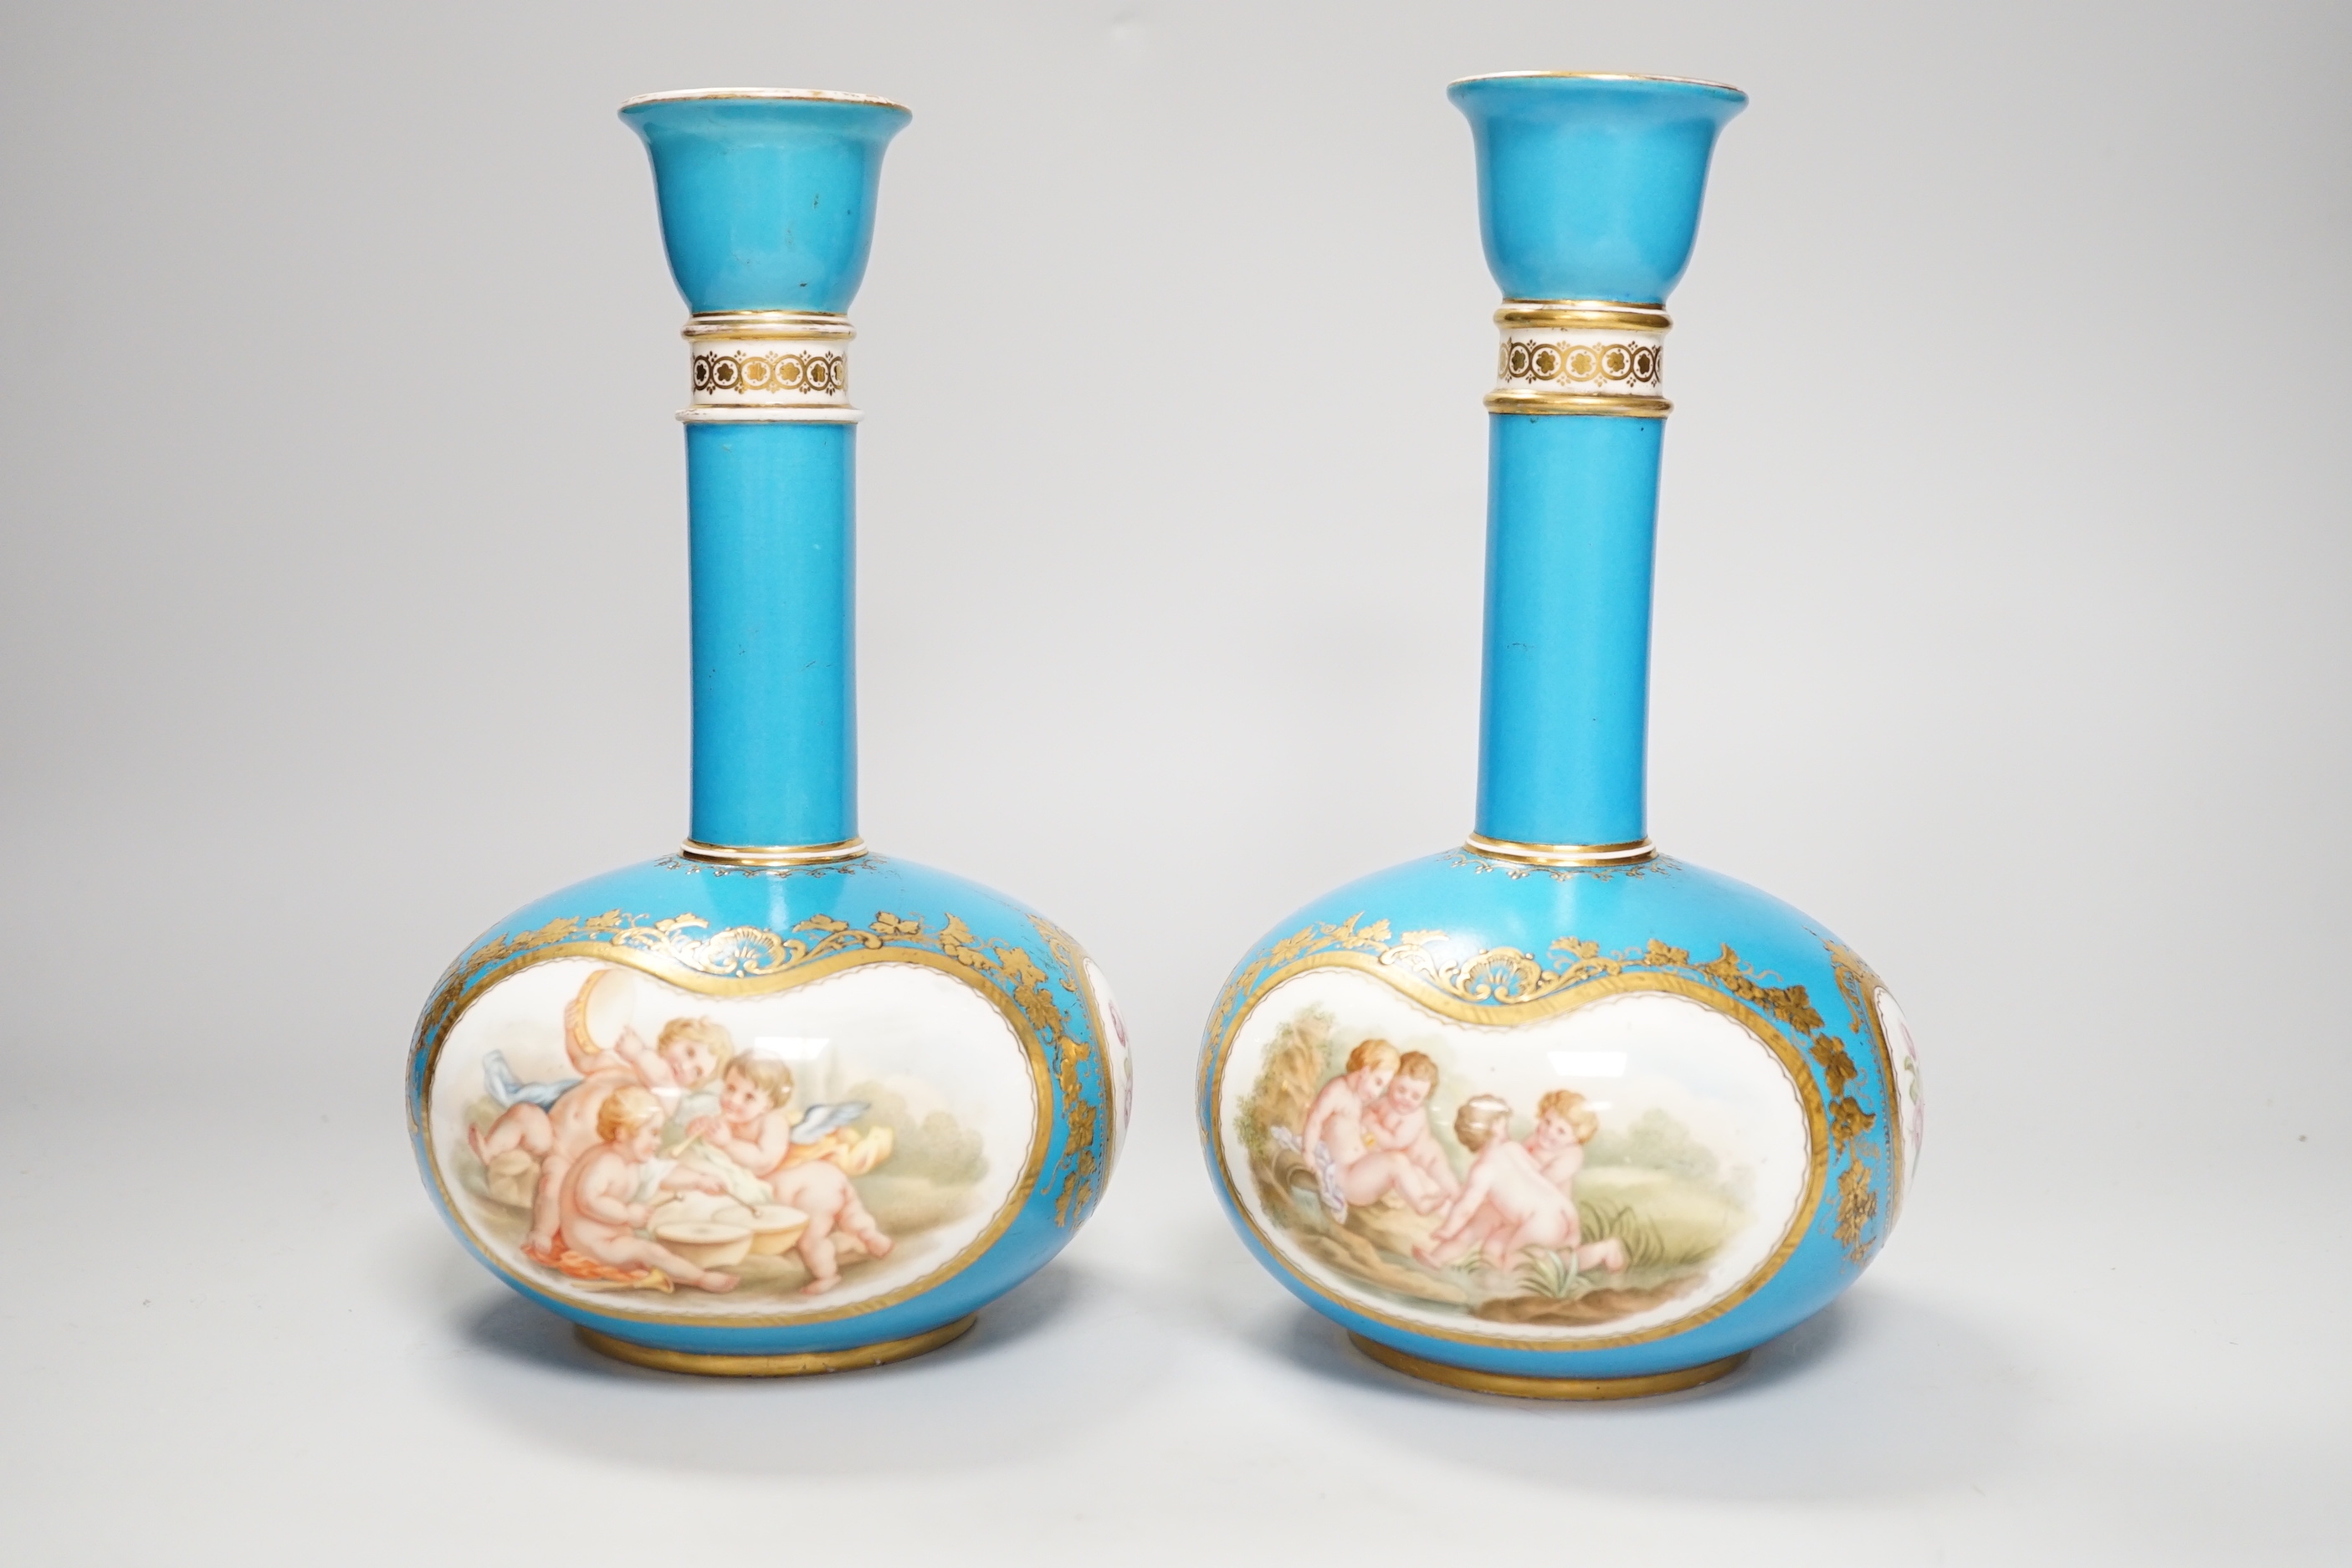 A pair of Coalport turquoise bottle vases, late 19th century, with putti and rose cartouche decoration, gilt CSN mark, 22cm high